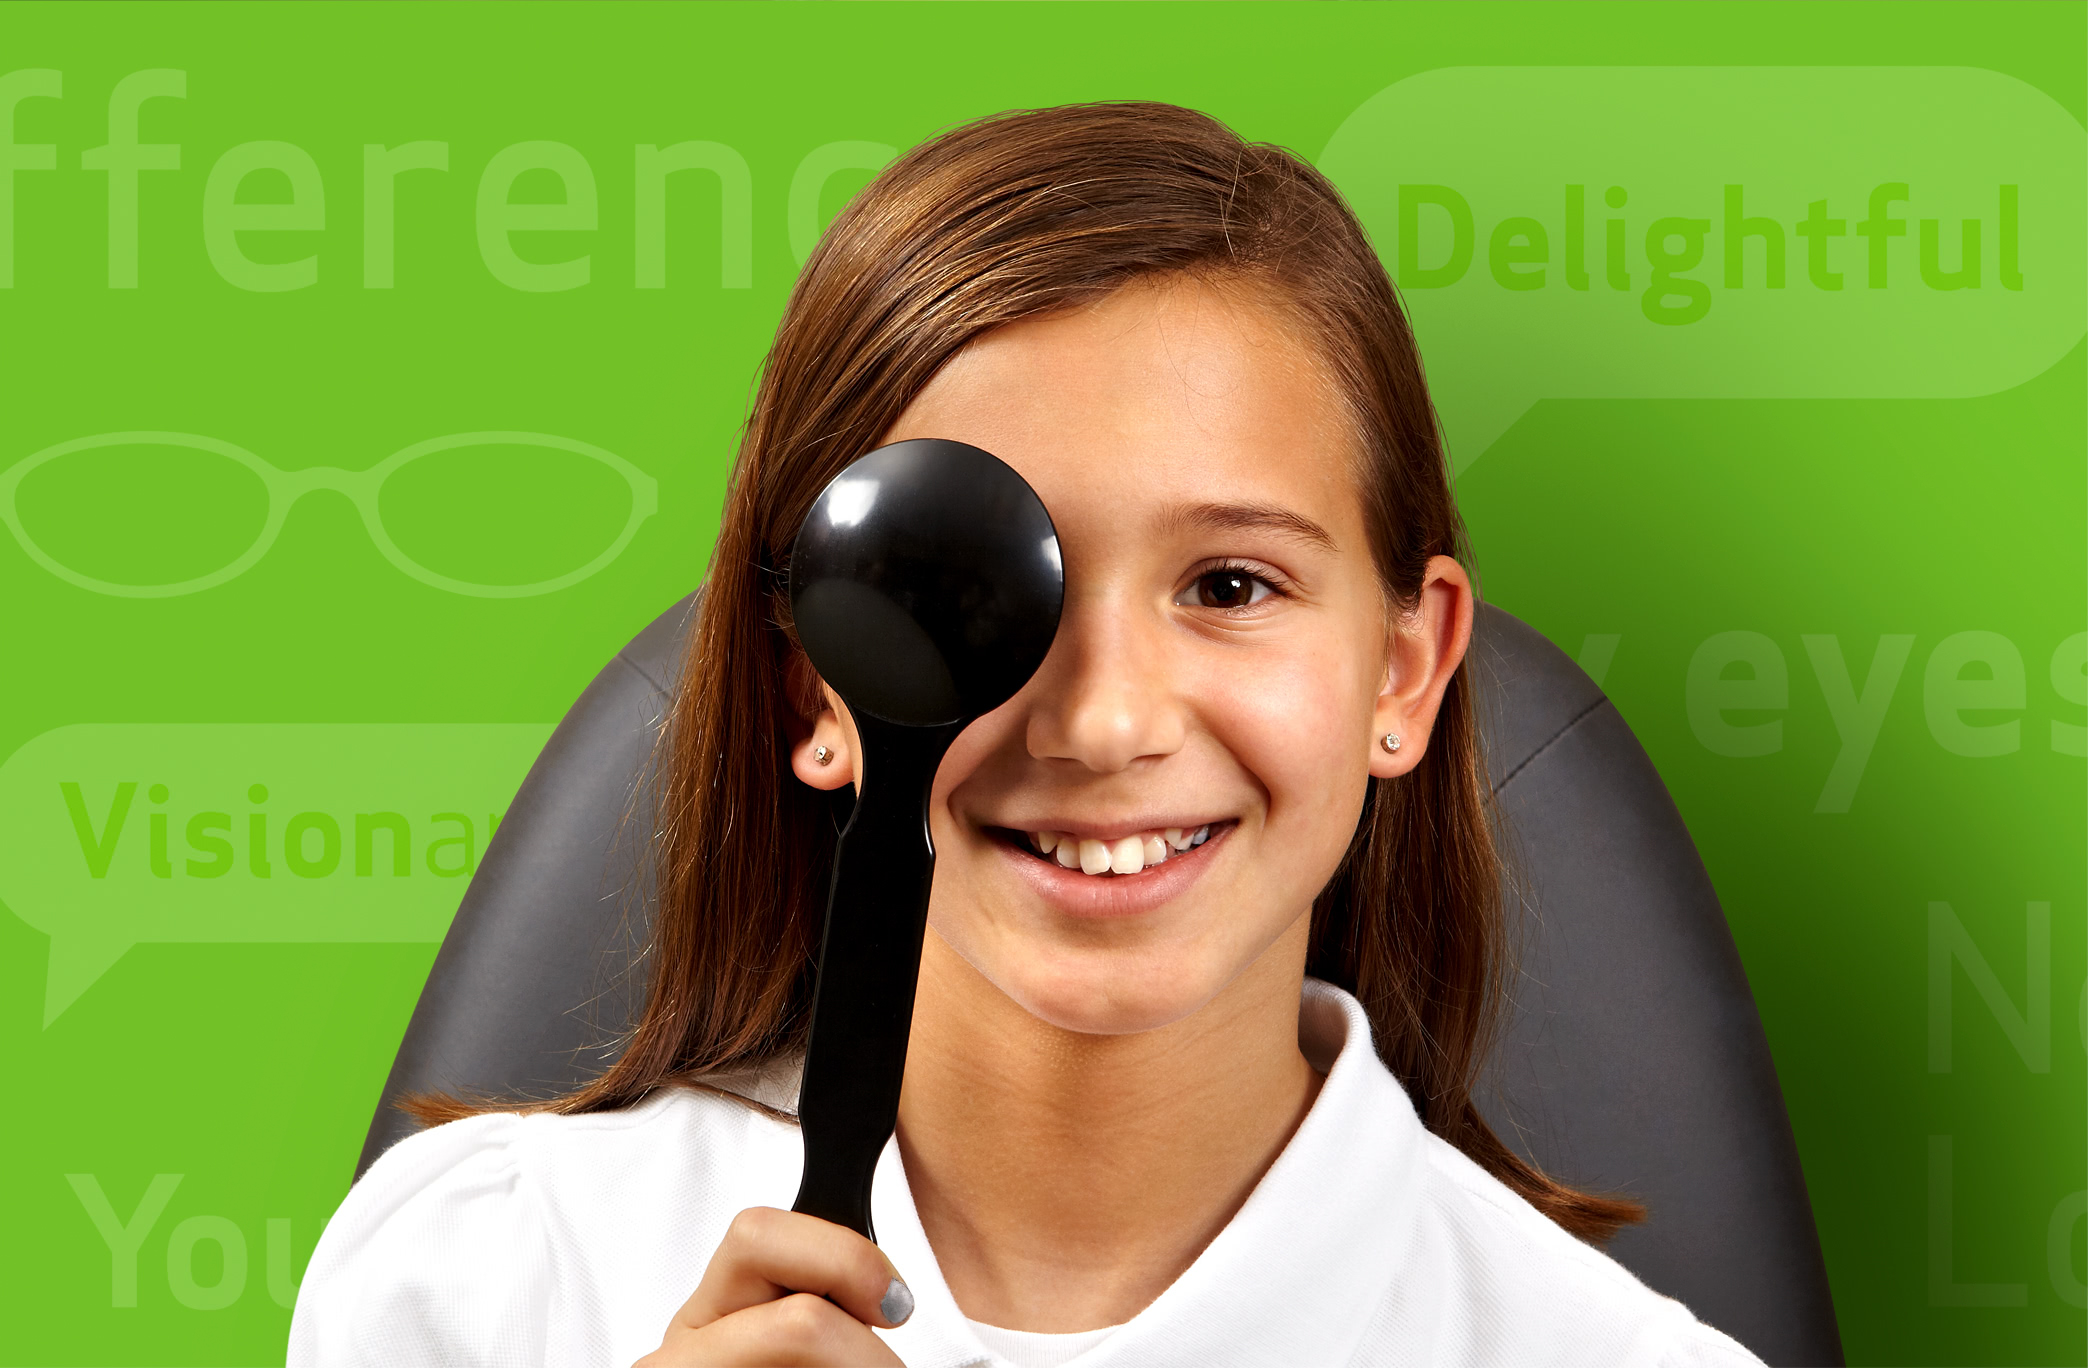 Photo of girl in eye exam with Blink Vision brand behind her